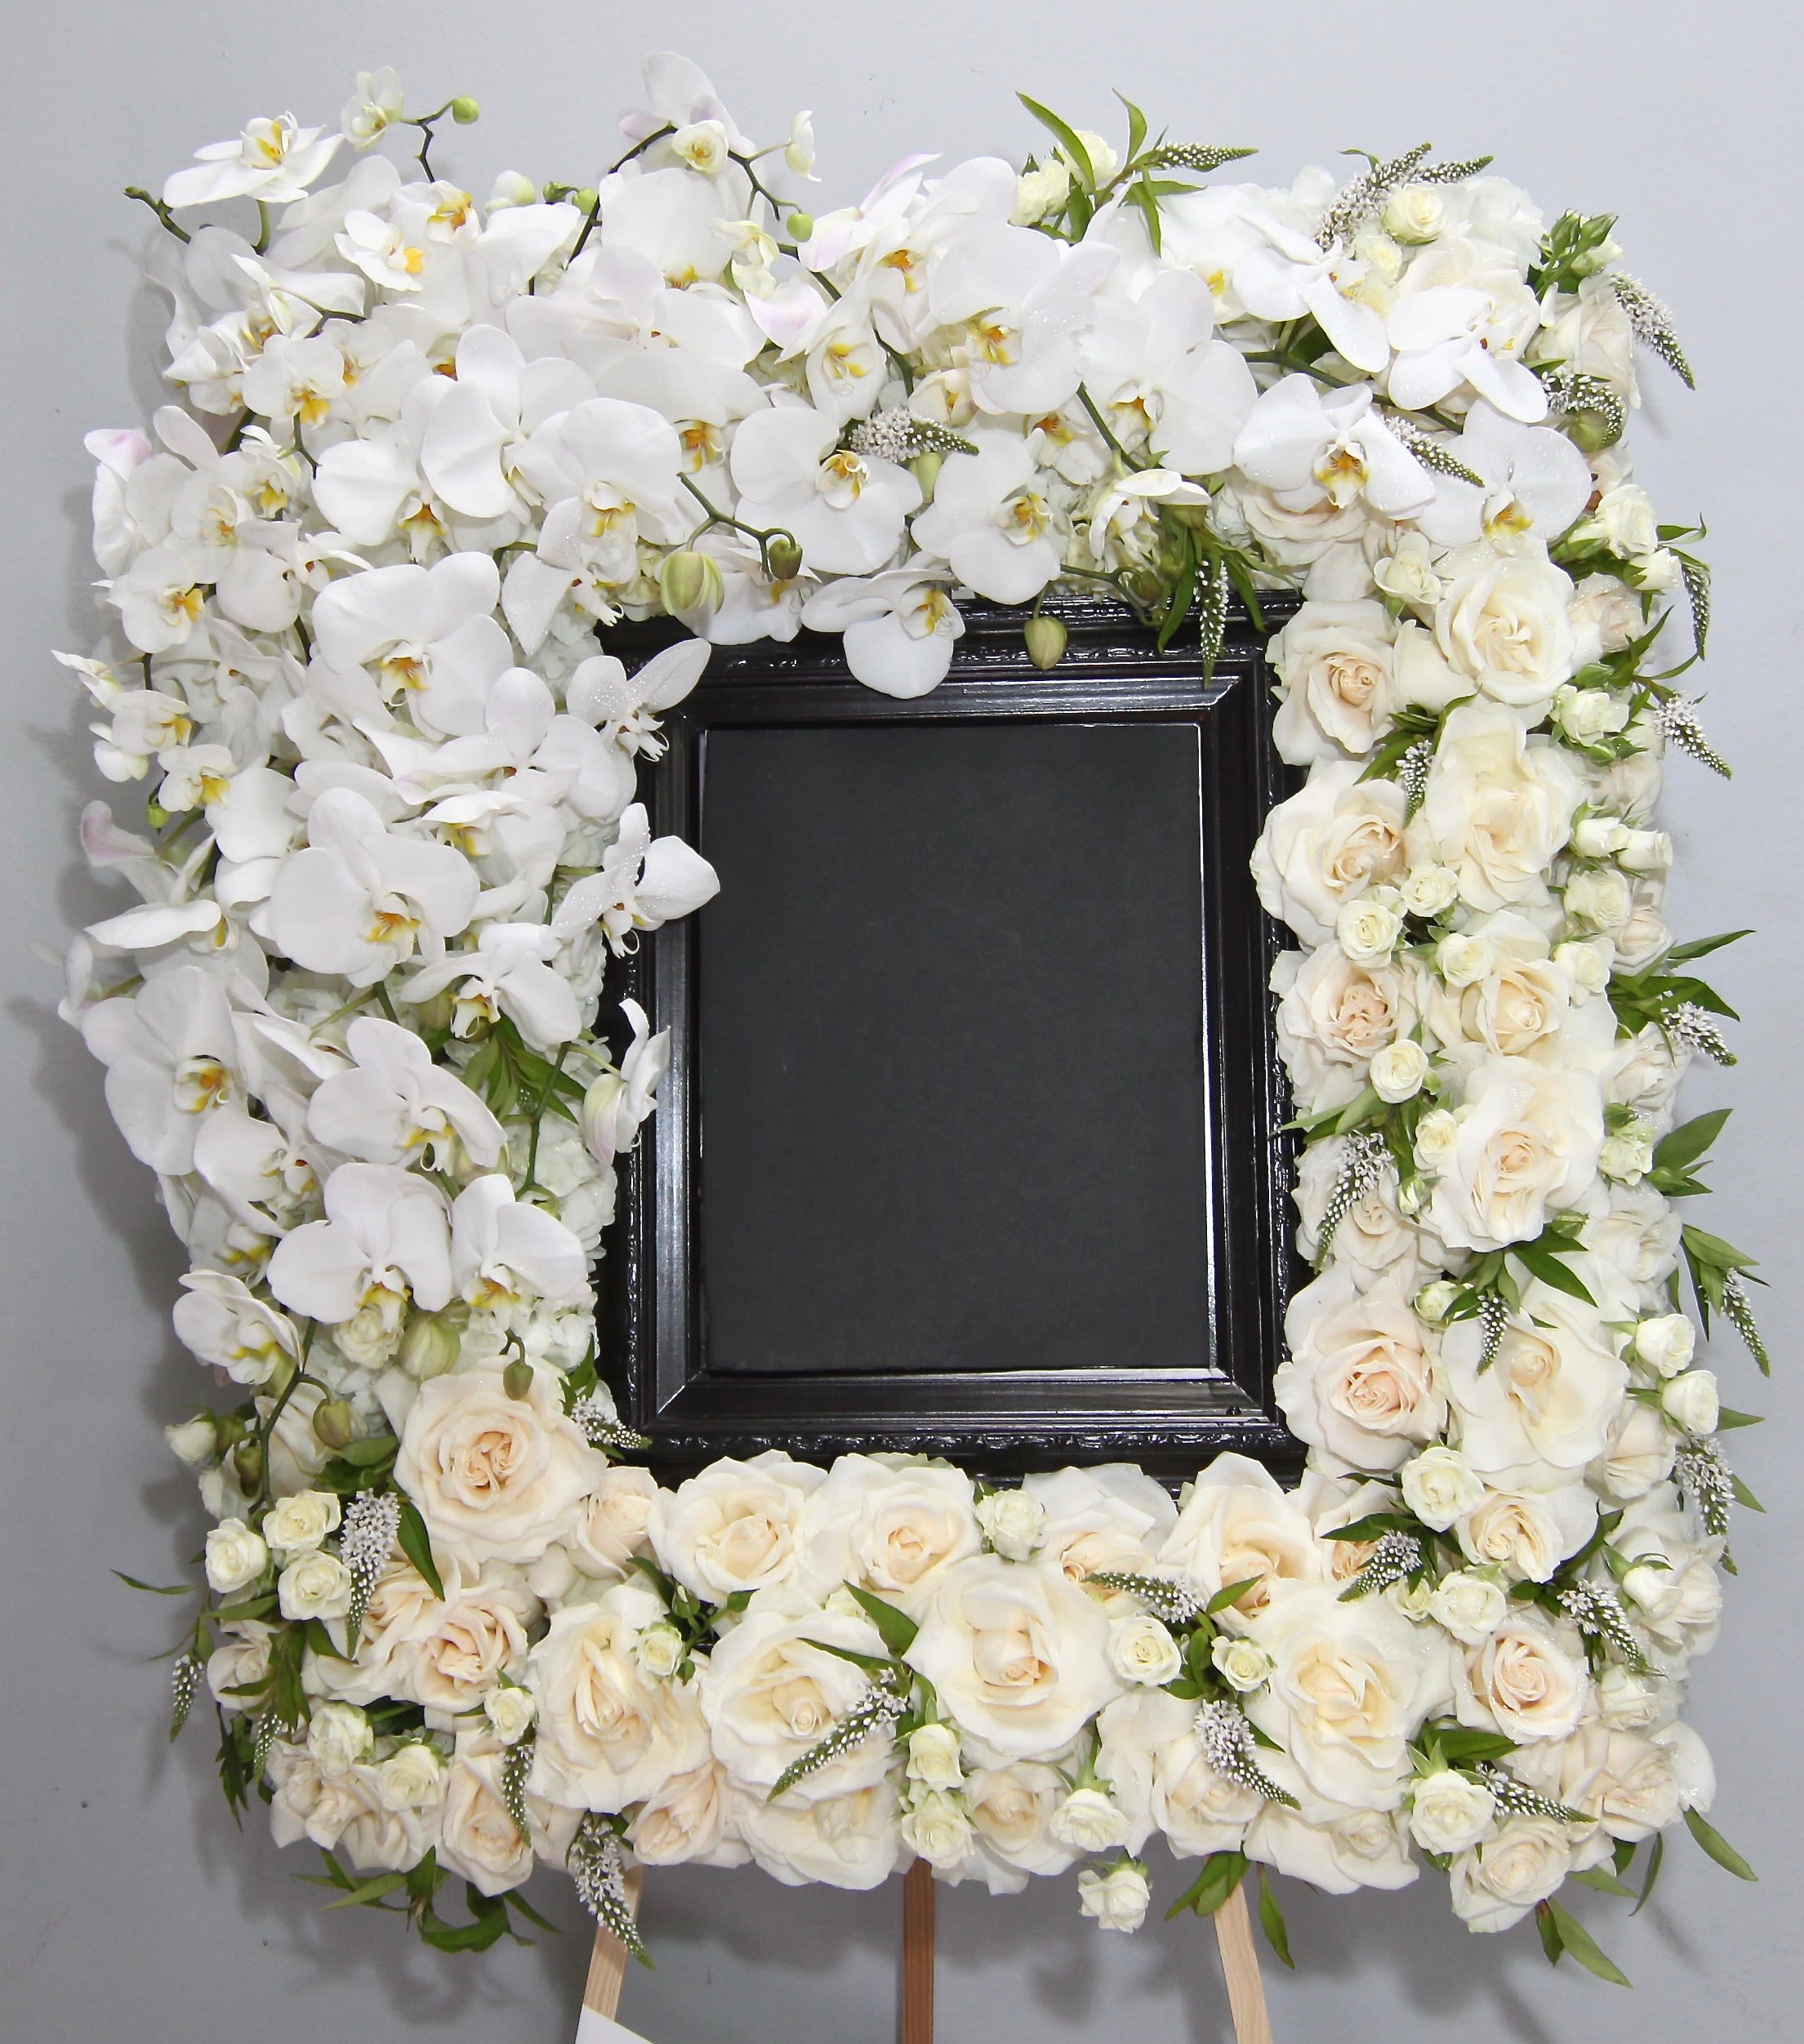 Orchid and Veronica Frame  - Standing at approximately 32inches, this frame contains white orchids, roses, and white veronica. Actual photo frame not included. Please provide this for us to place in the arrangement. Call to coordinate.   Large frame dimensions approximately 36x28  